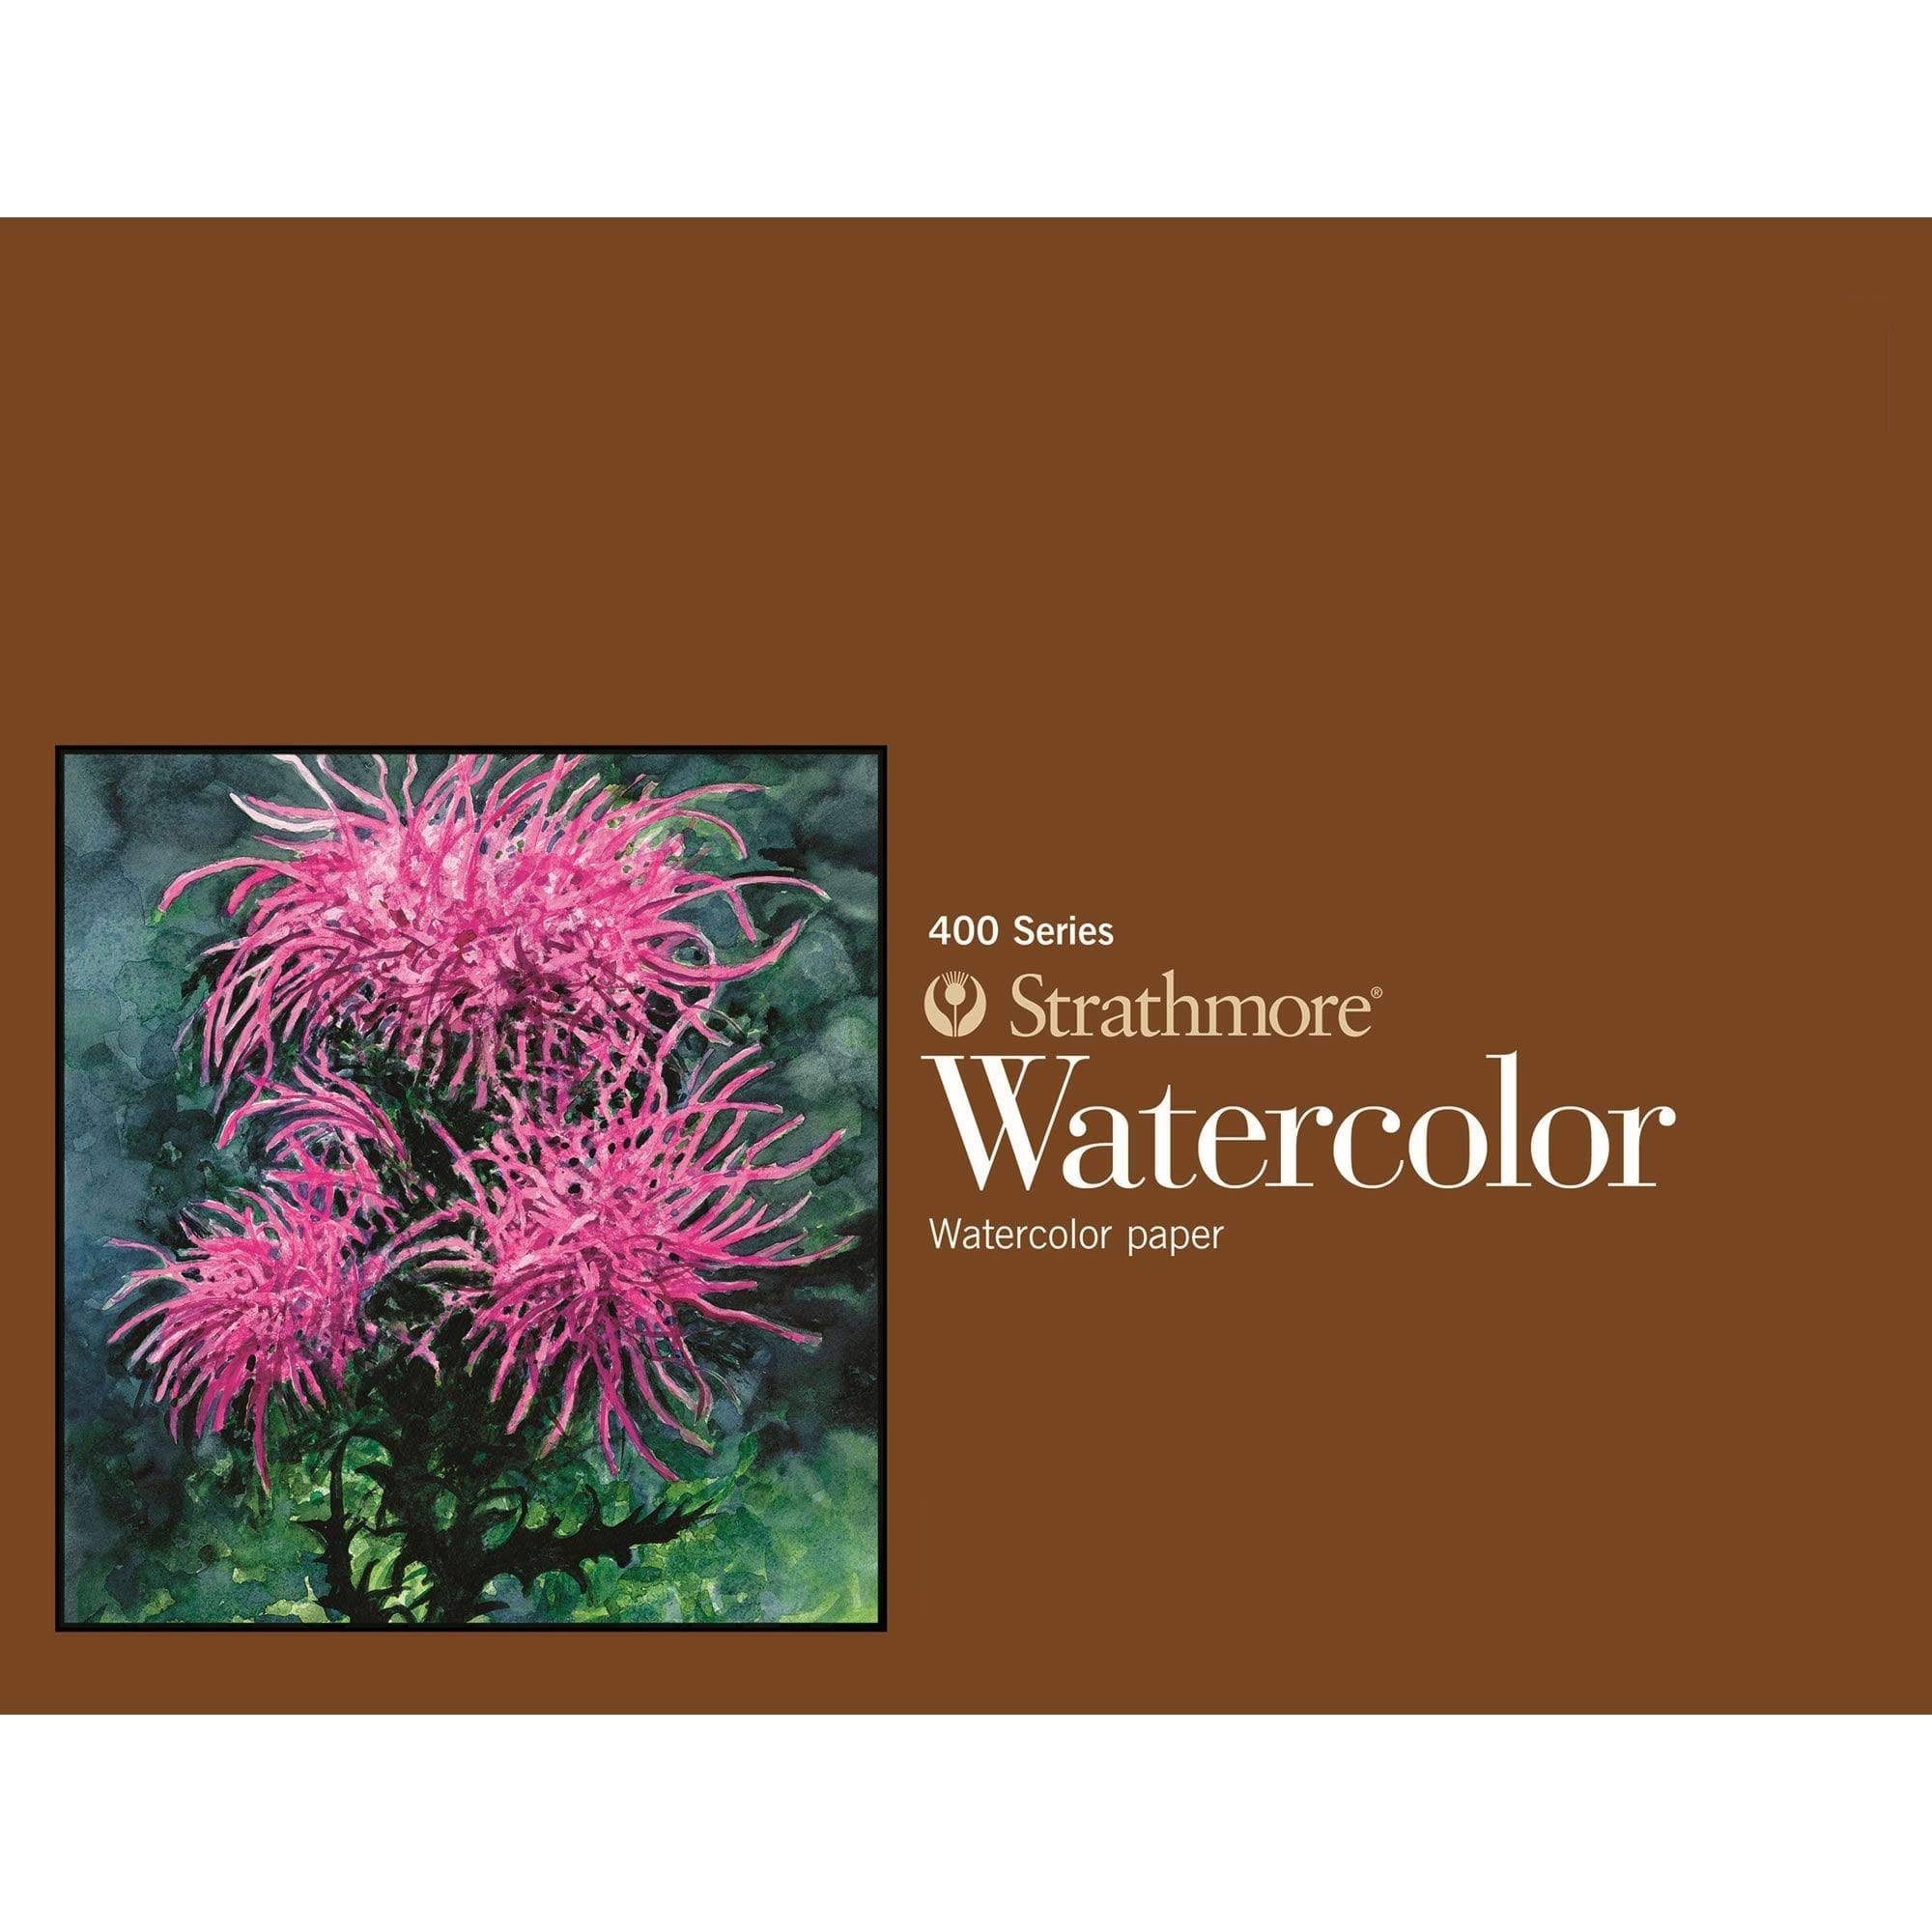 60cm x 100cm Cold Press Watercolour Sheets | Strathmore | Arts & Crafts | Free Shipping On All Orders | 30 Day Money Back Guarantee